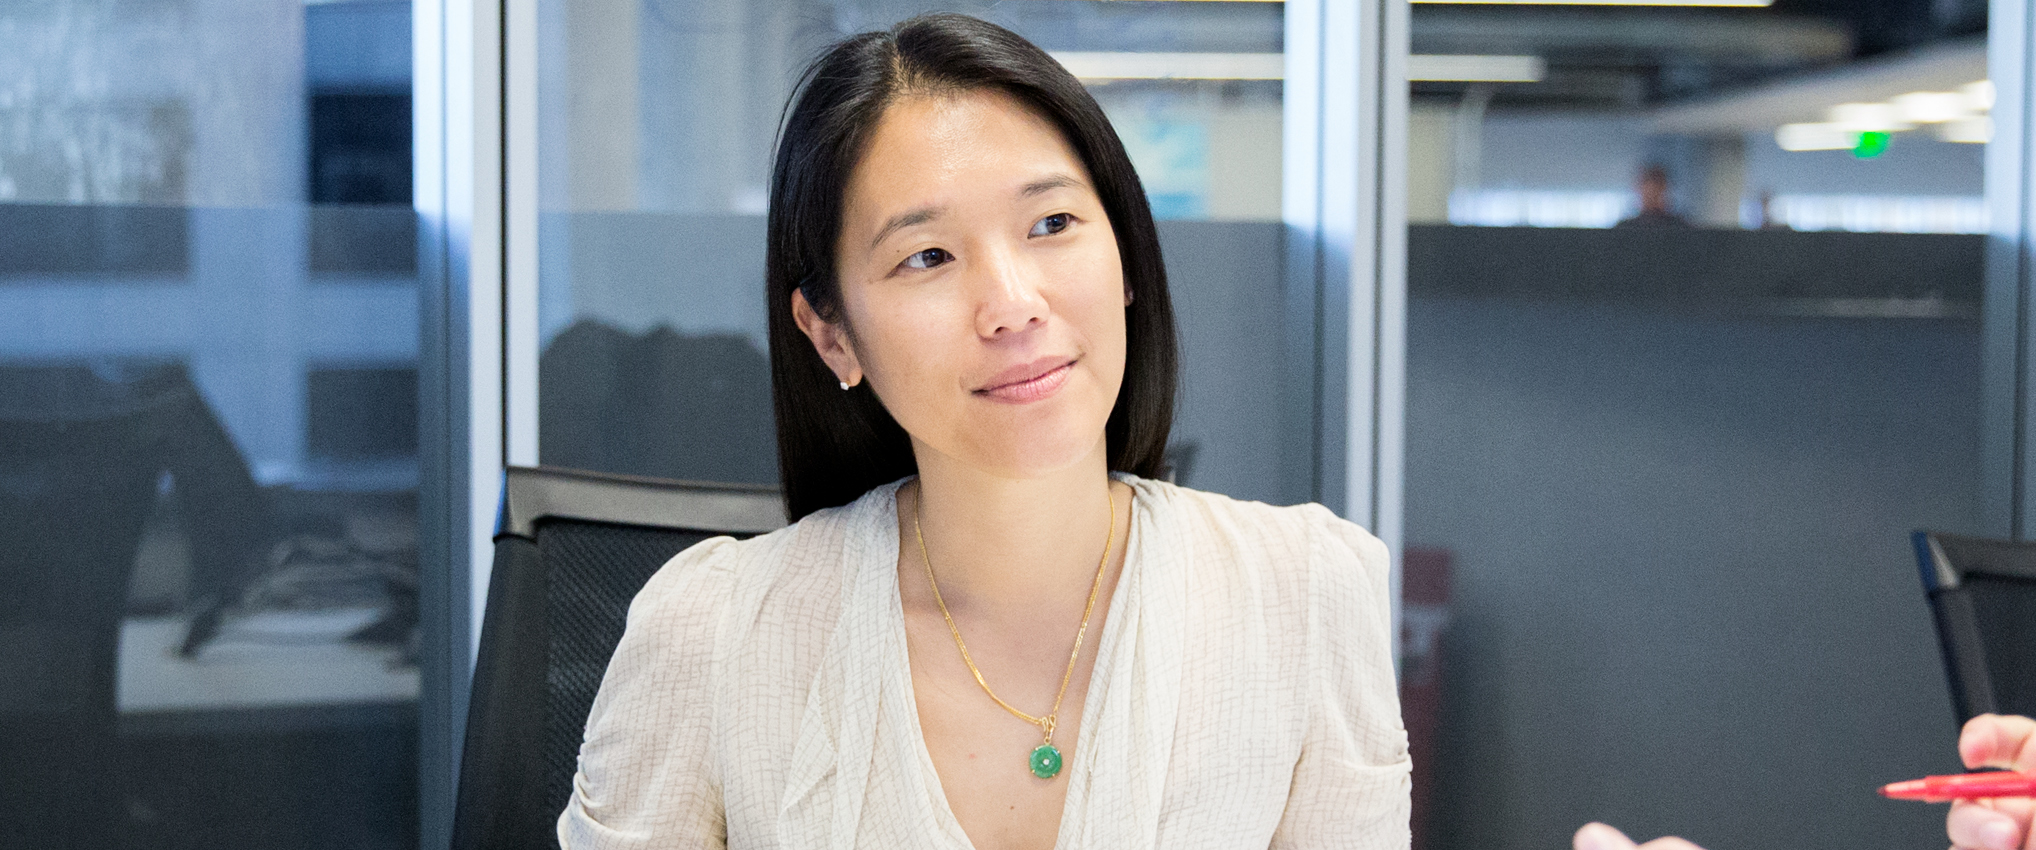 Julie Hiromoto Joins the AIA Committee on the Environment Advisory Group